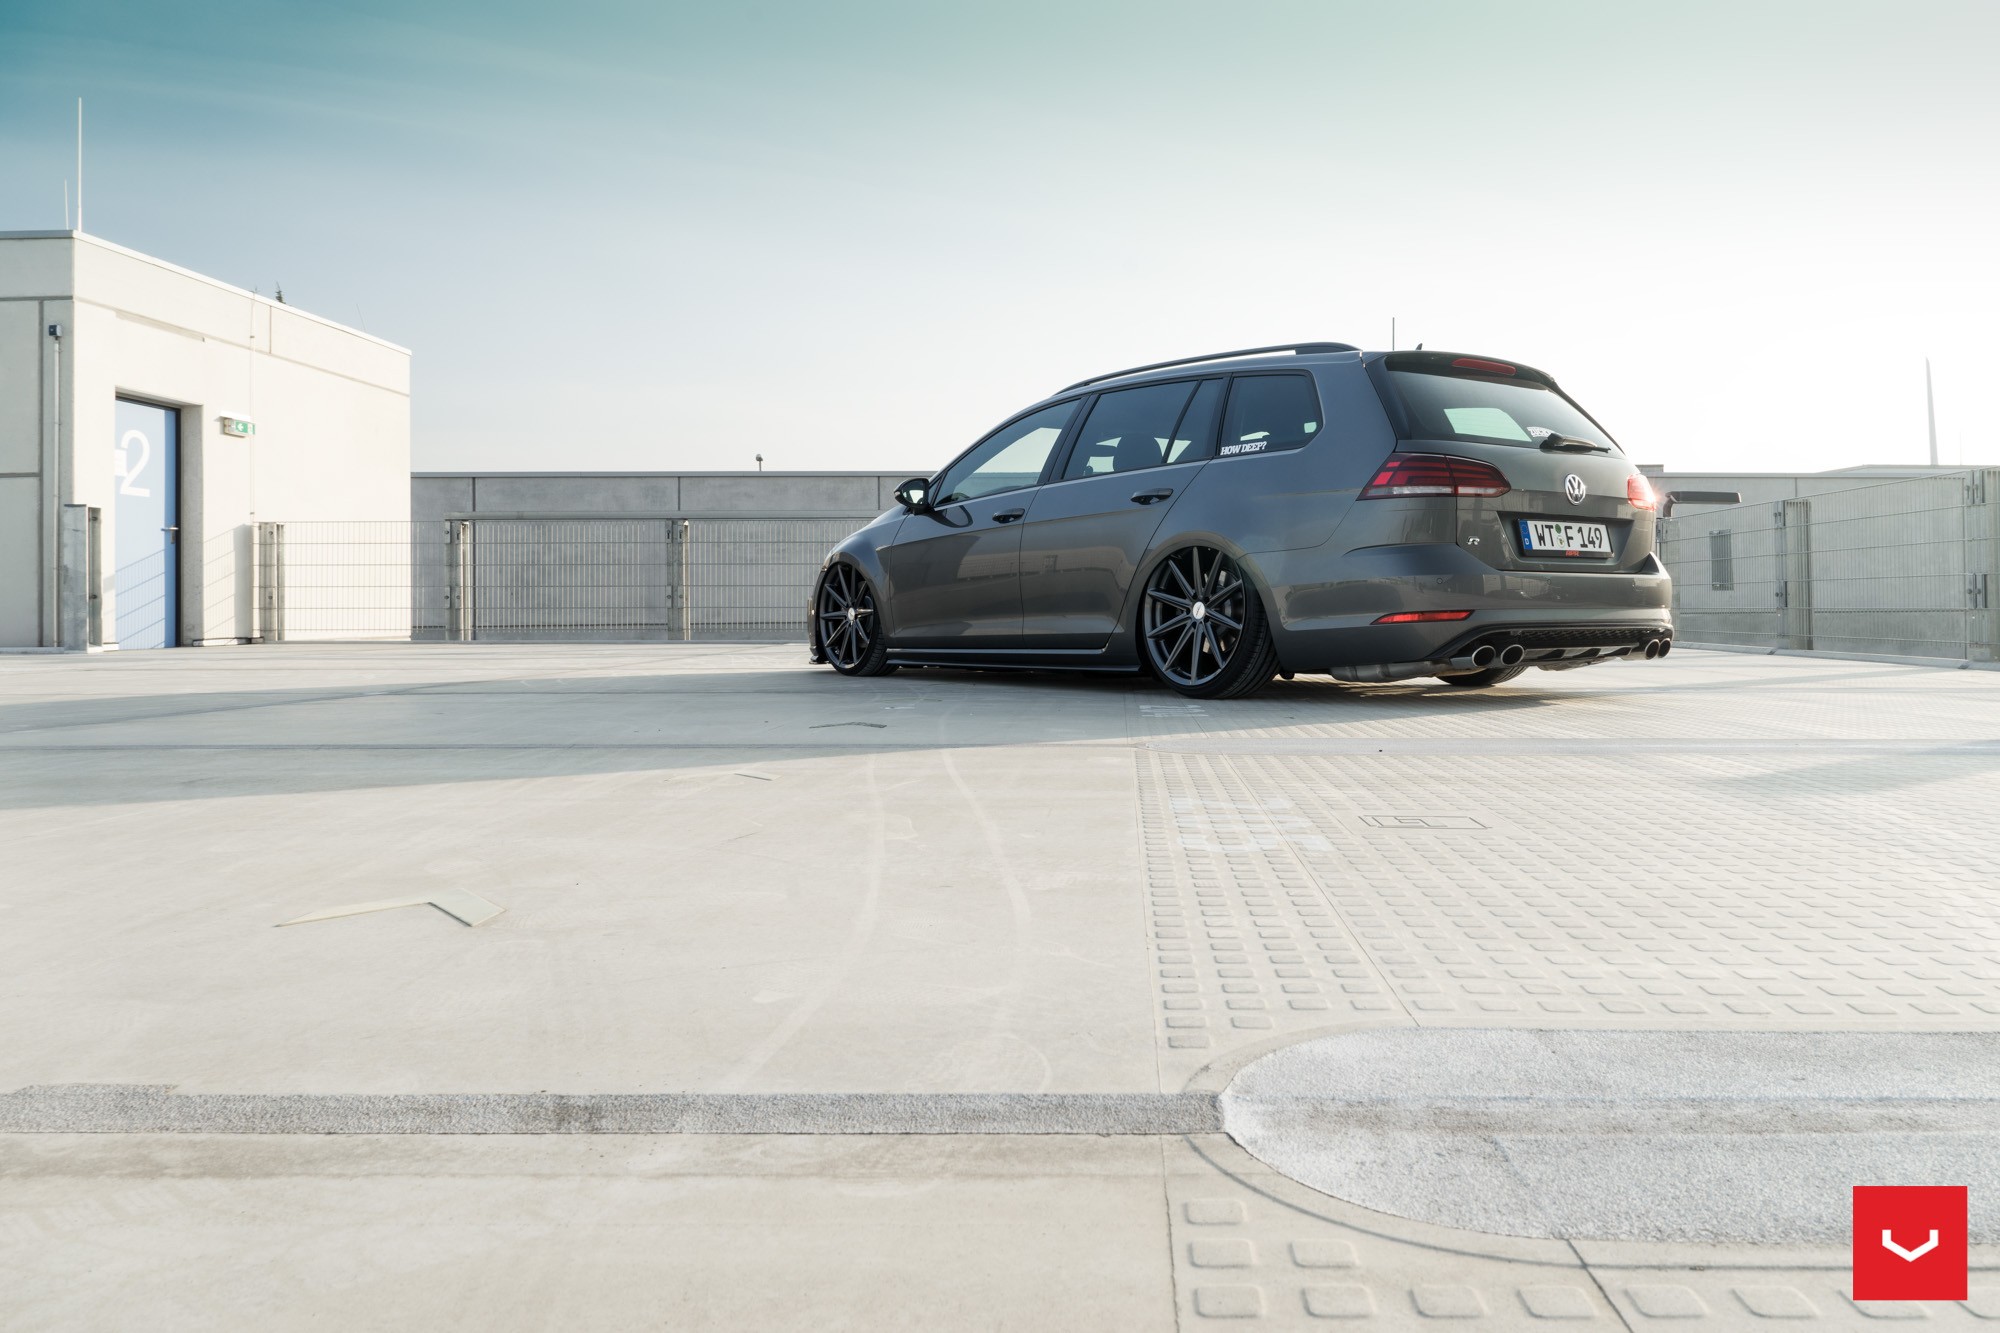 2017 Golf R Variant Gets Stanced on Vossen Wheels for Tuning Debut ...